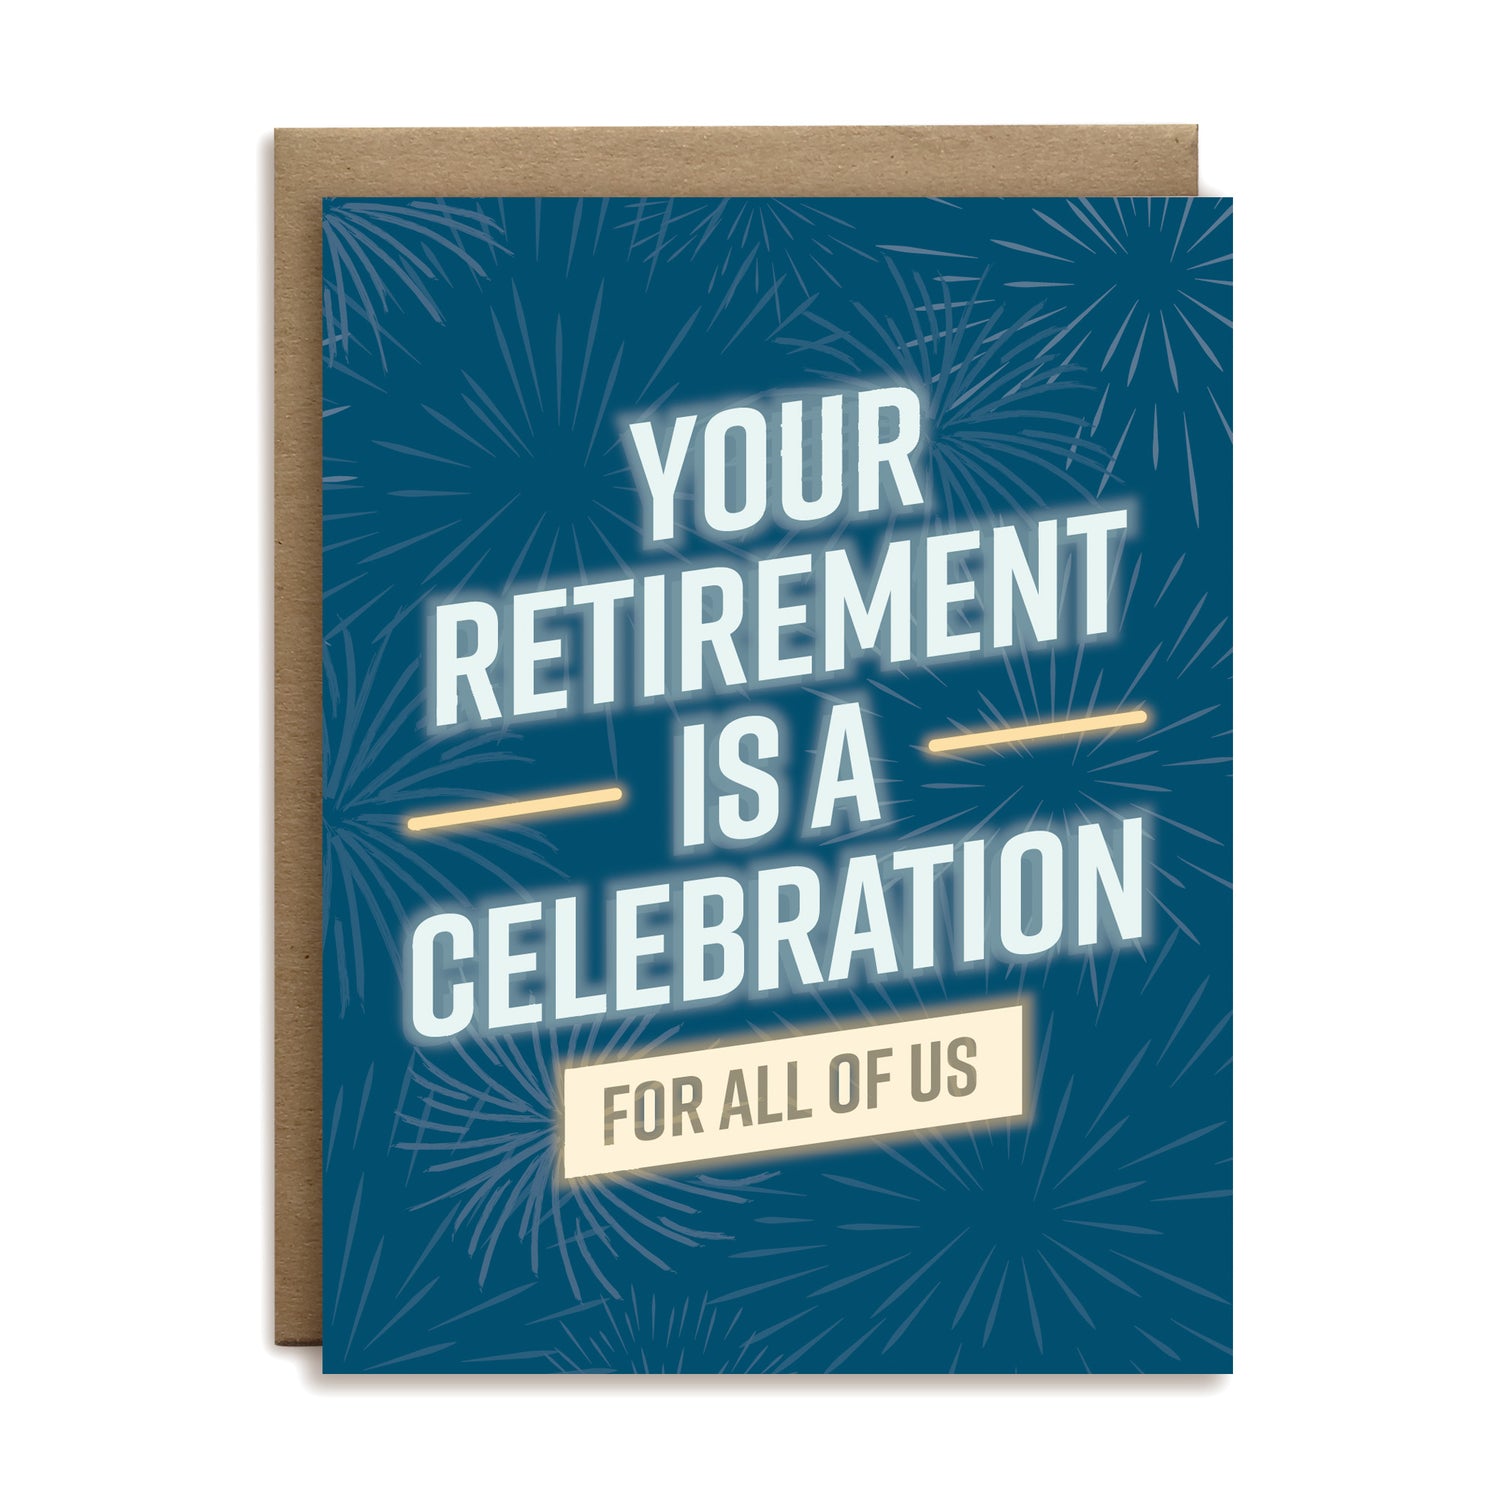 Your retirement is a celebration for all of us greeting card by I’ll Know It When I See It